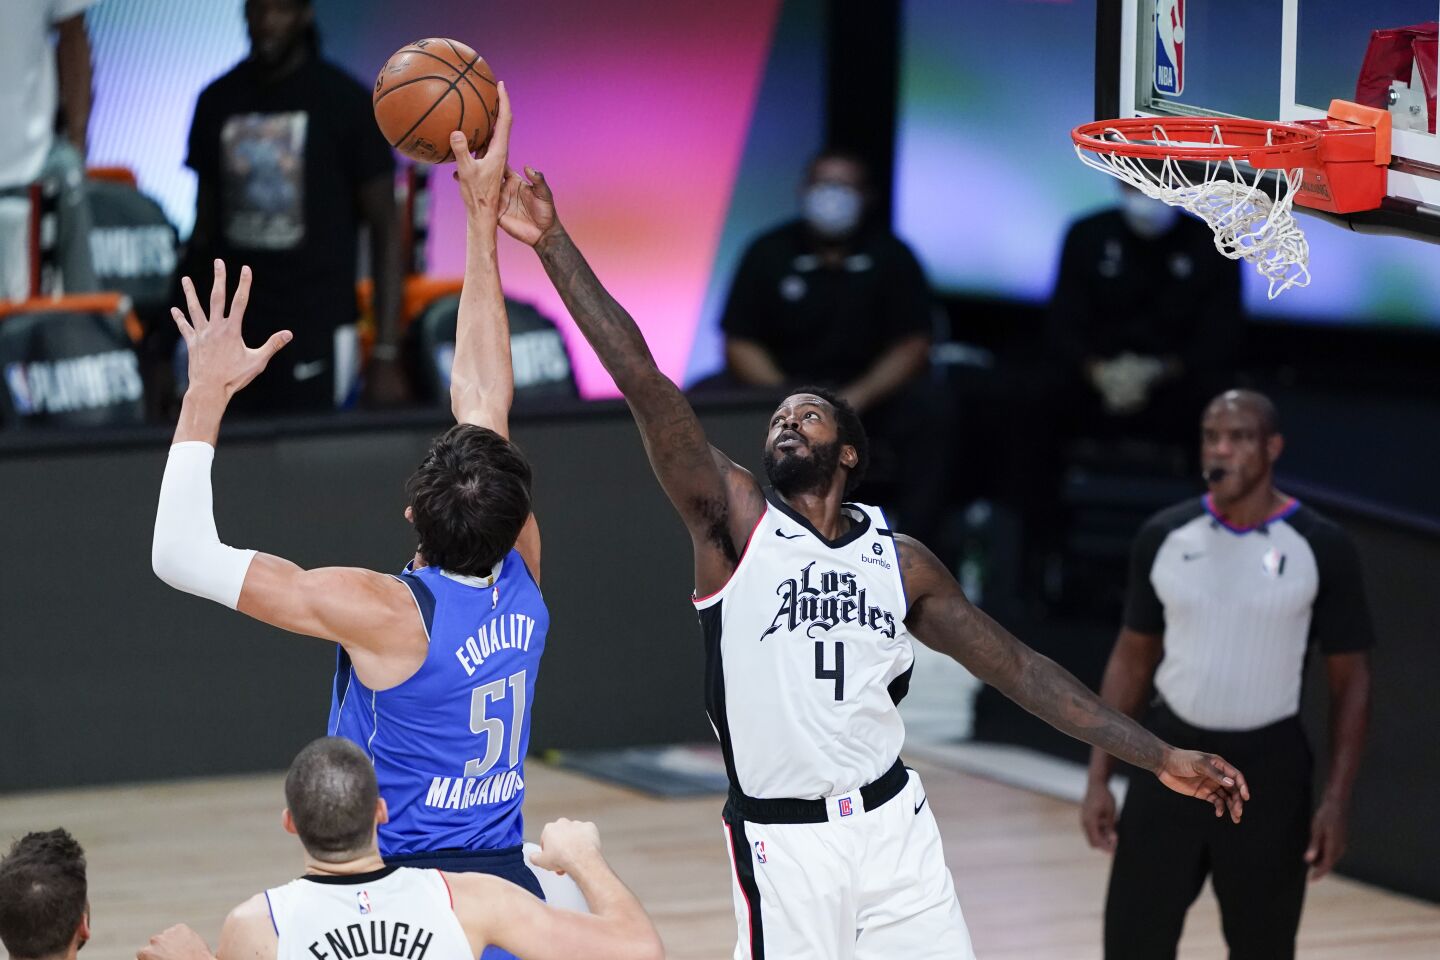 Dallas Mavericks center Boban Marjanovic, left, and Clippers forward JaMychal Green reach for a rebound during Game 3.